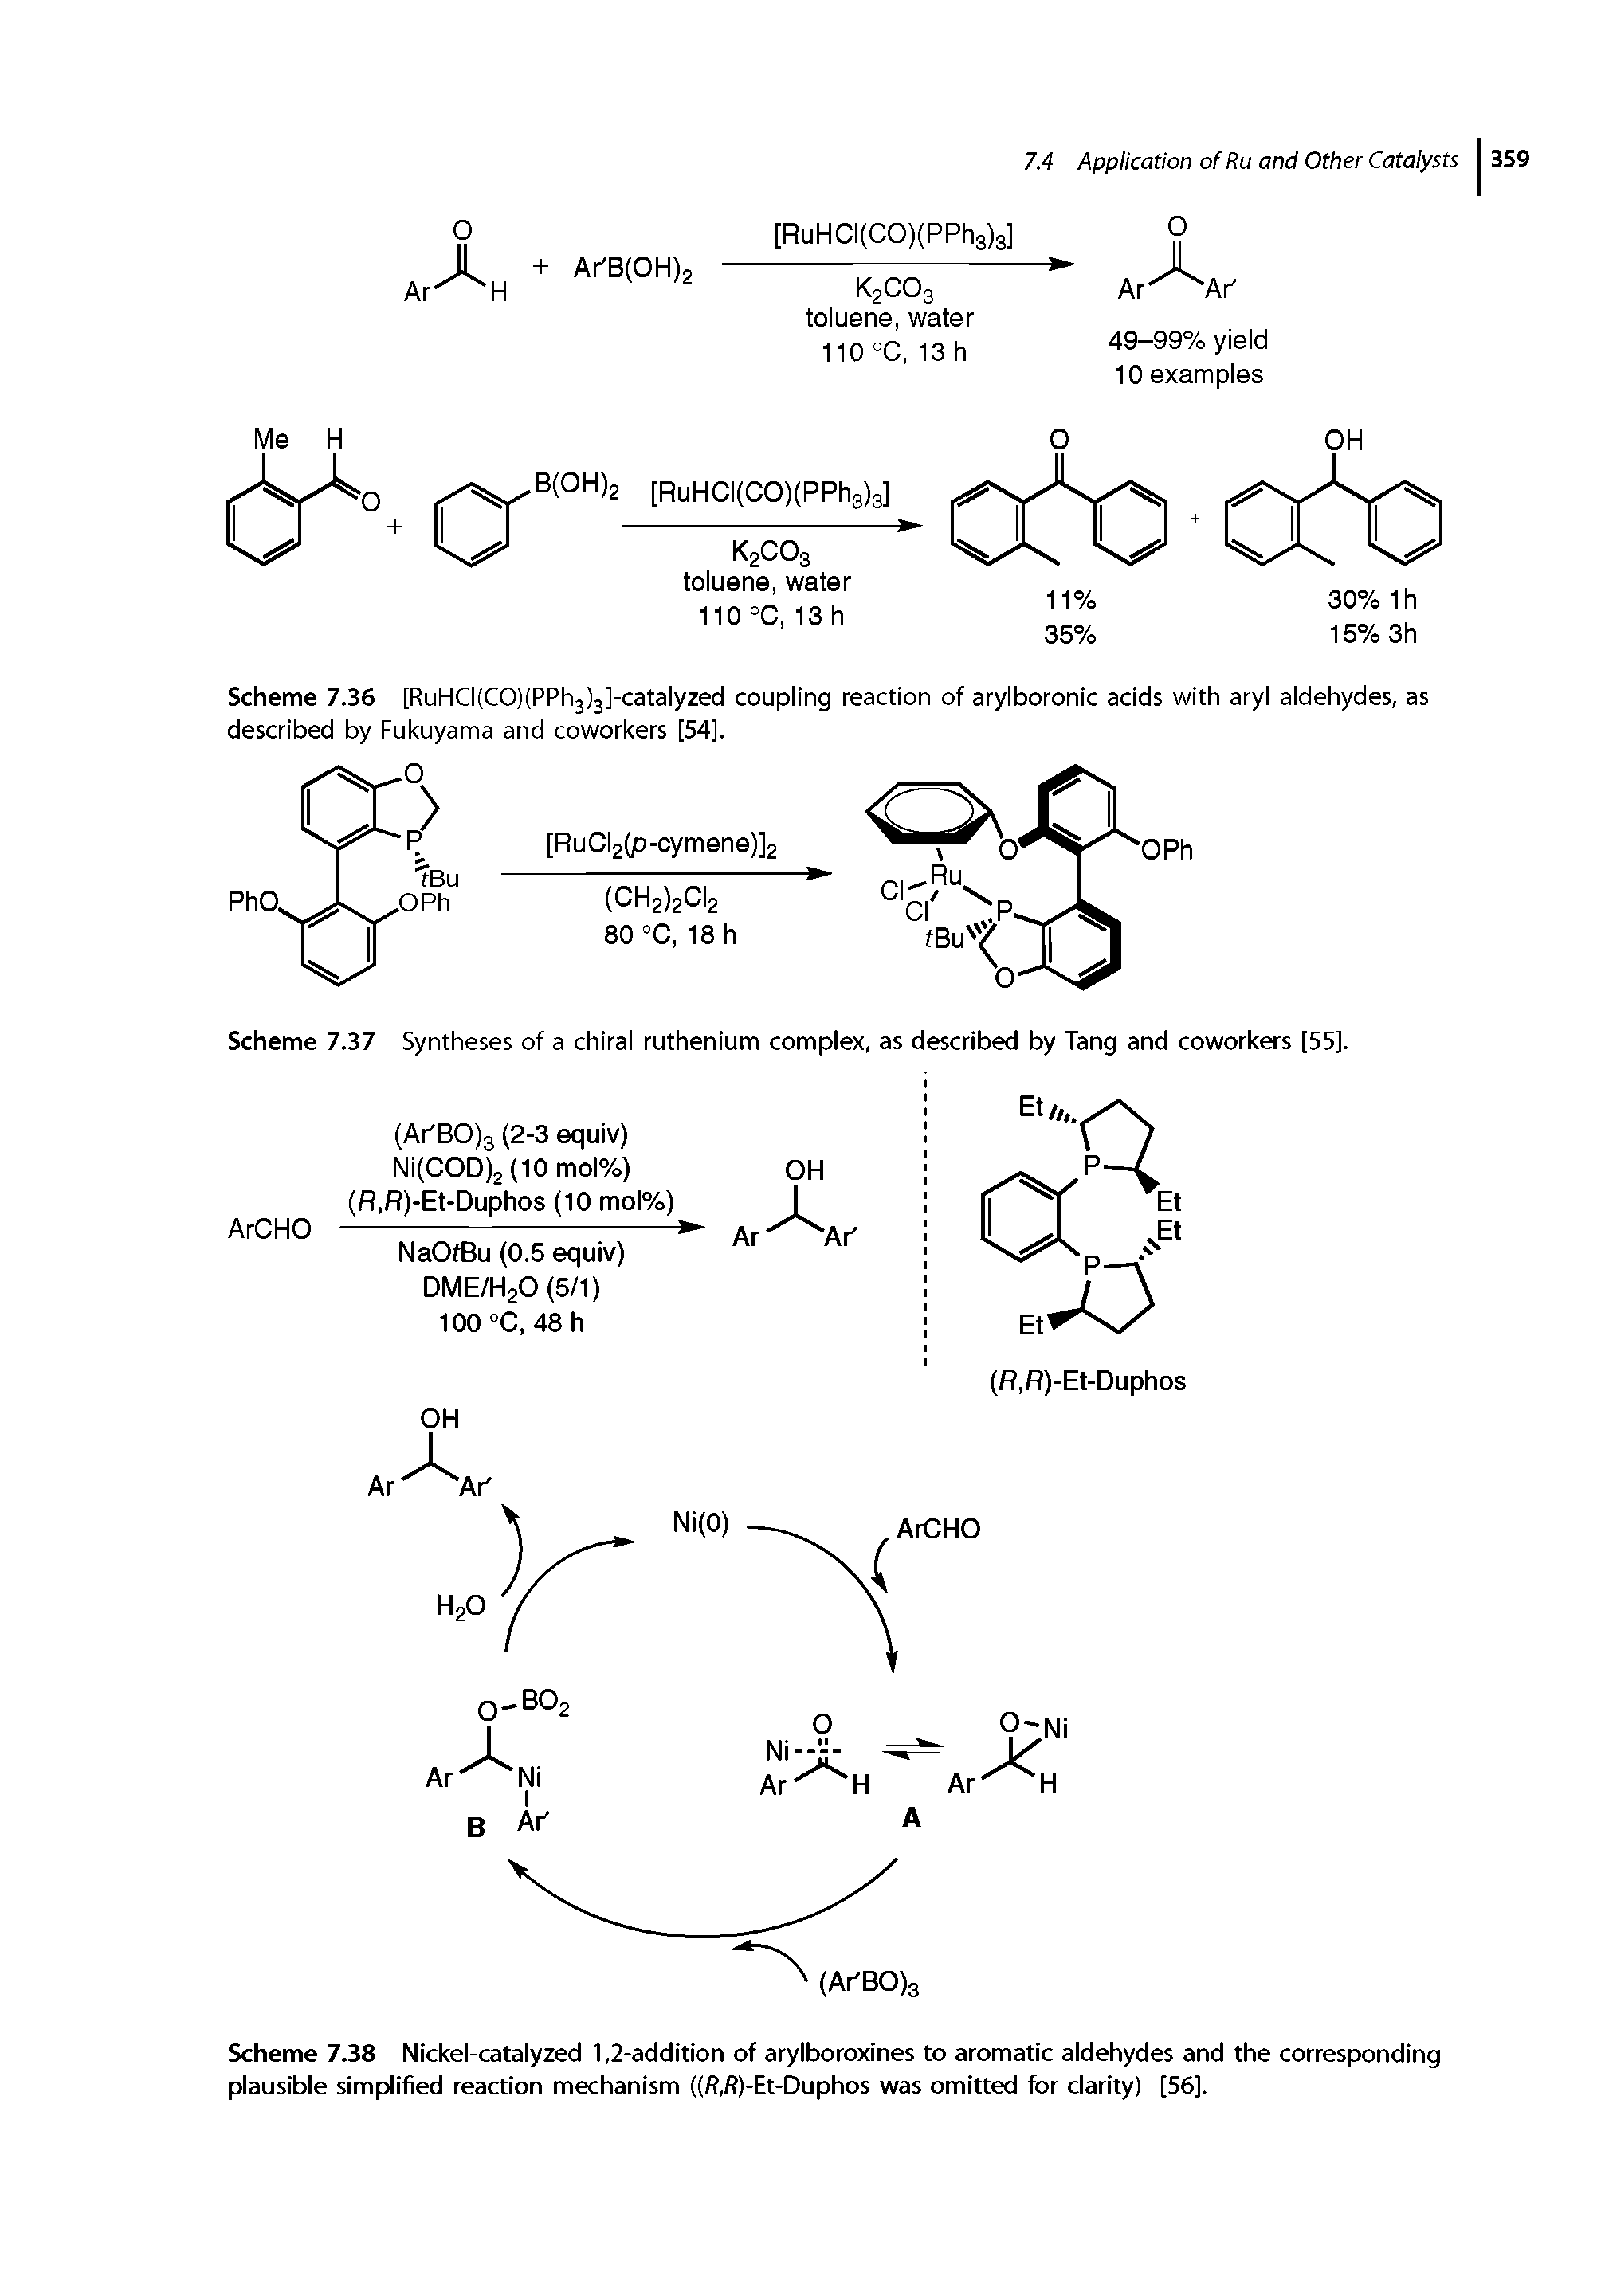 Scheme 7.36 [RuHCKCOjtPPhjjjJ-catalyzed coupling reaction of arylboronic adds with aryl aldehydes, as described by Fukuyama and coworkers [54],...